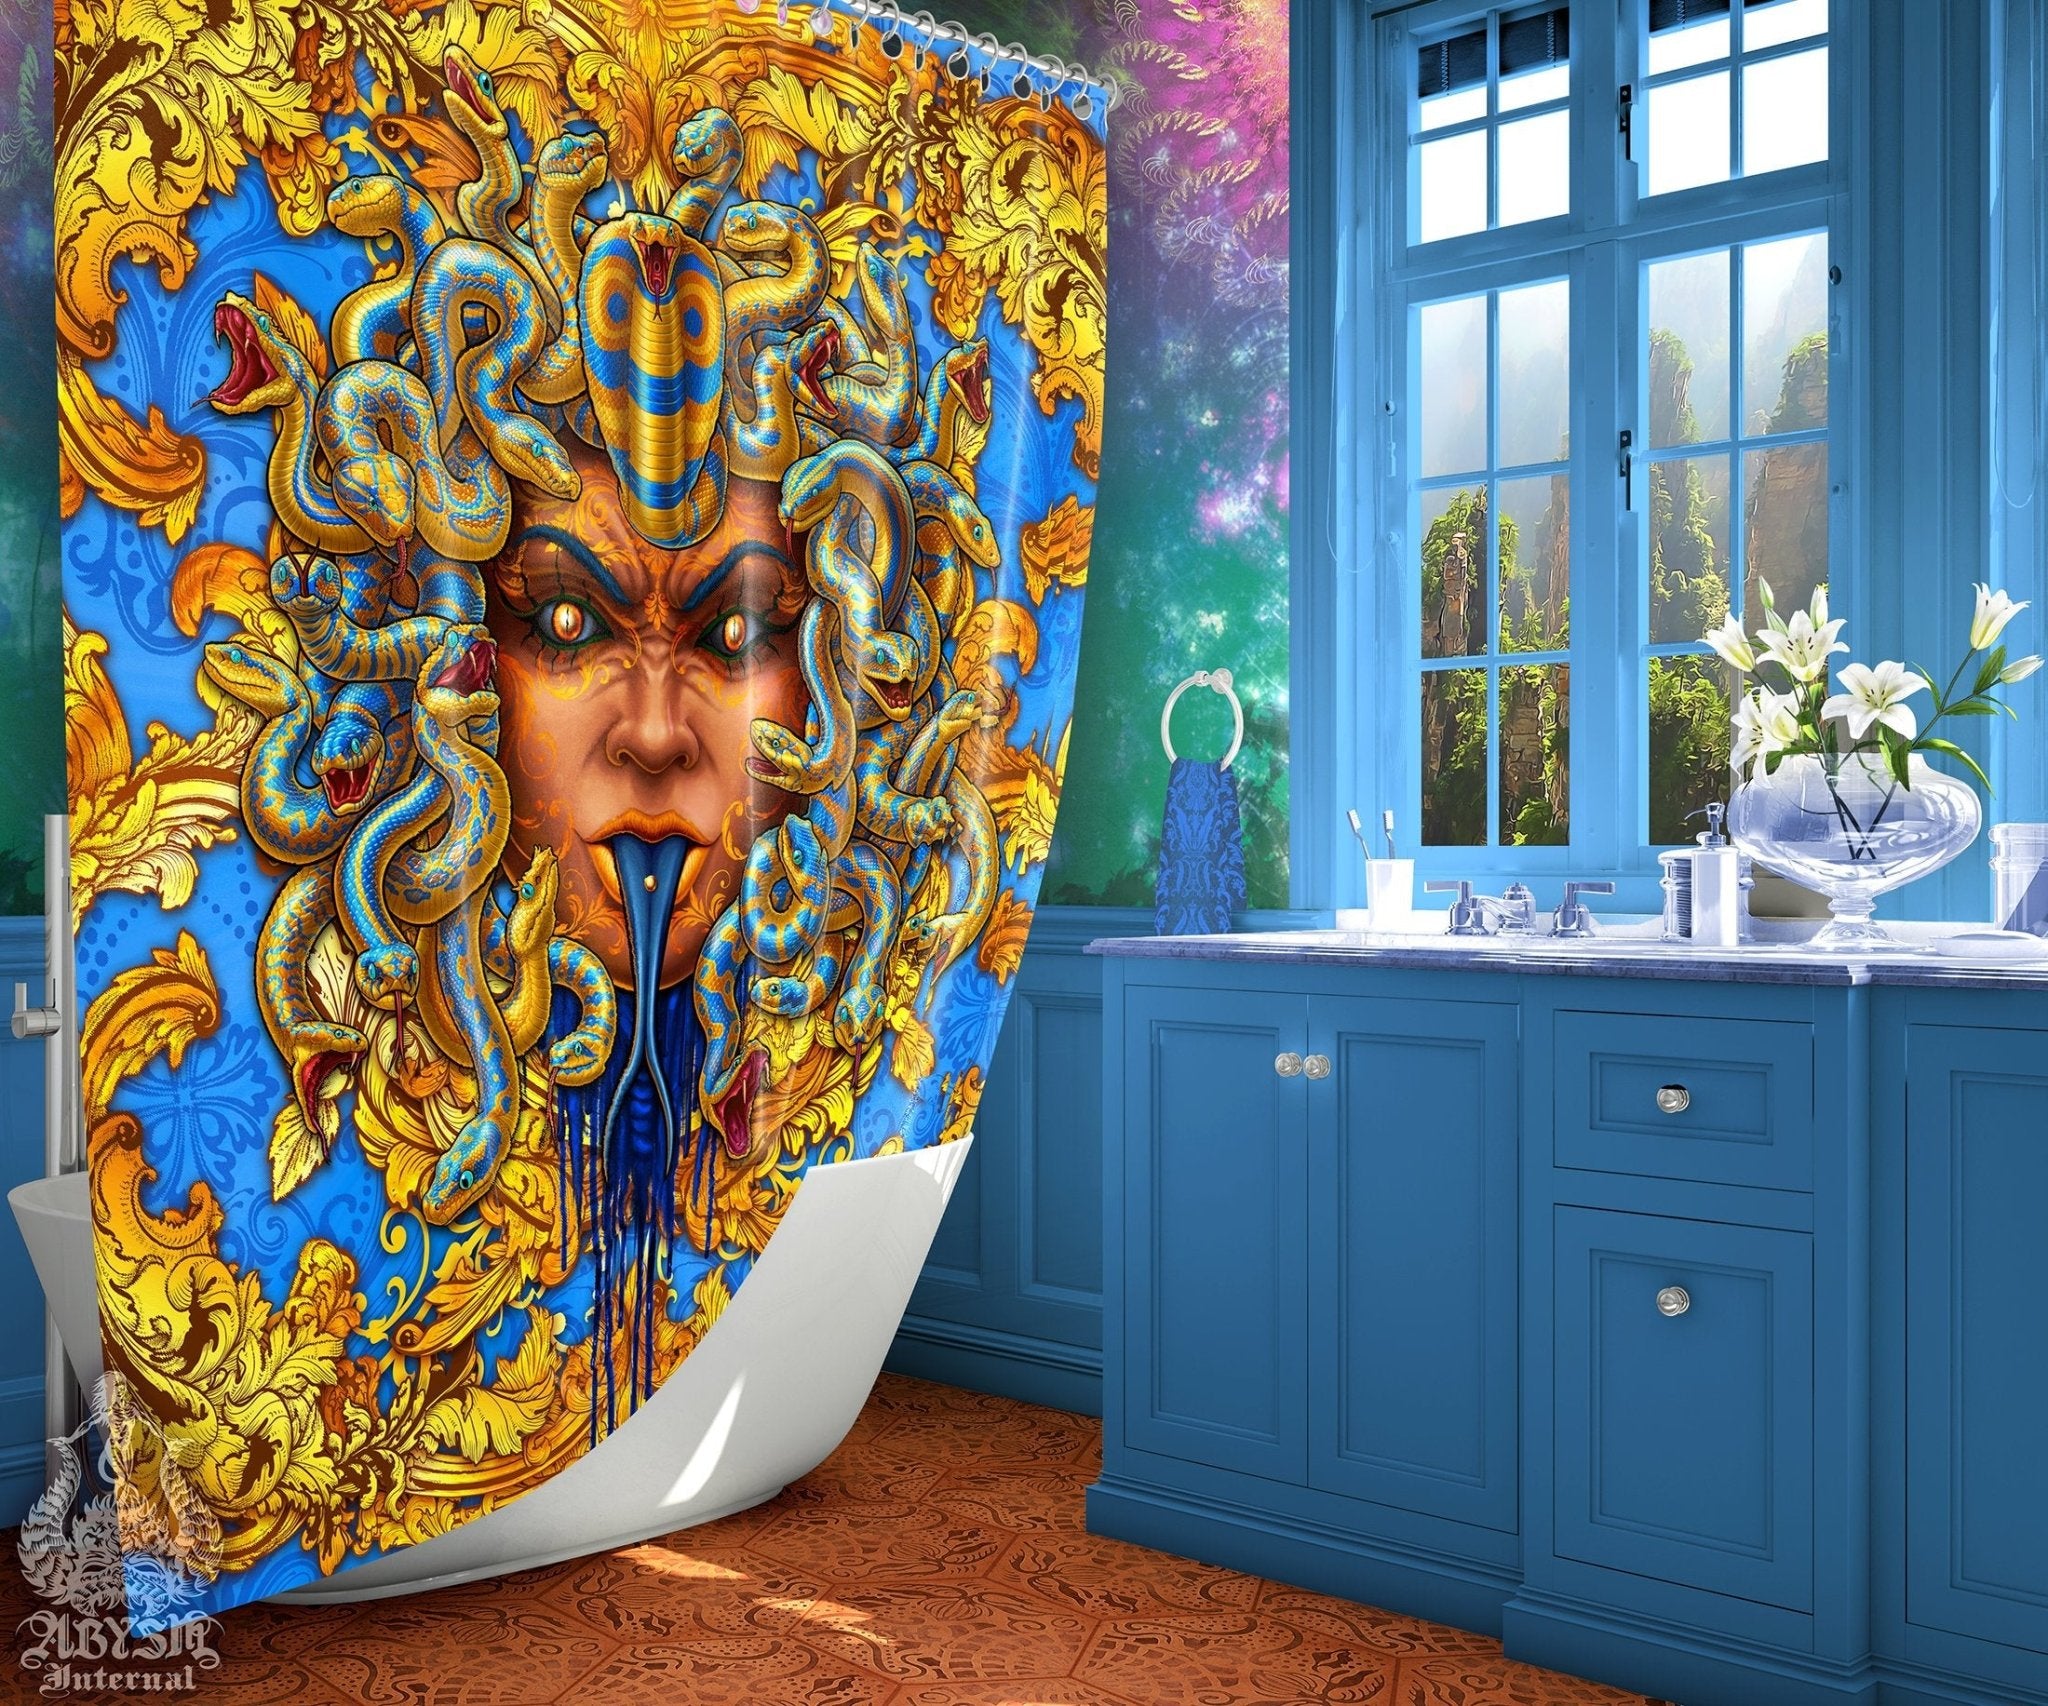 Medusa Shower Curtain, Baroque Bathroom Decor, Victorian Ornaments, Eclectic and Funky Home - Cyan & Gold Snakes - Abysm Internal